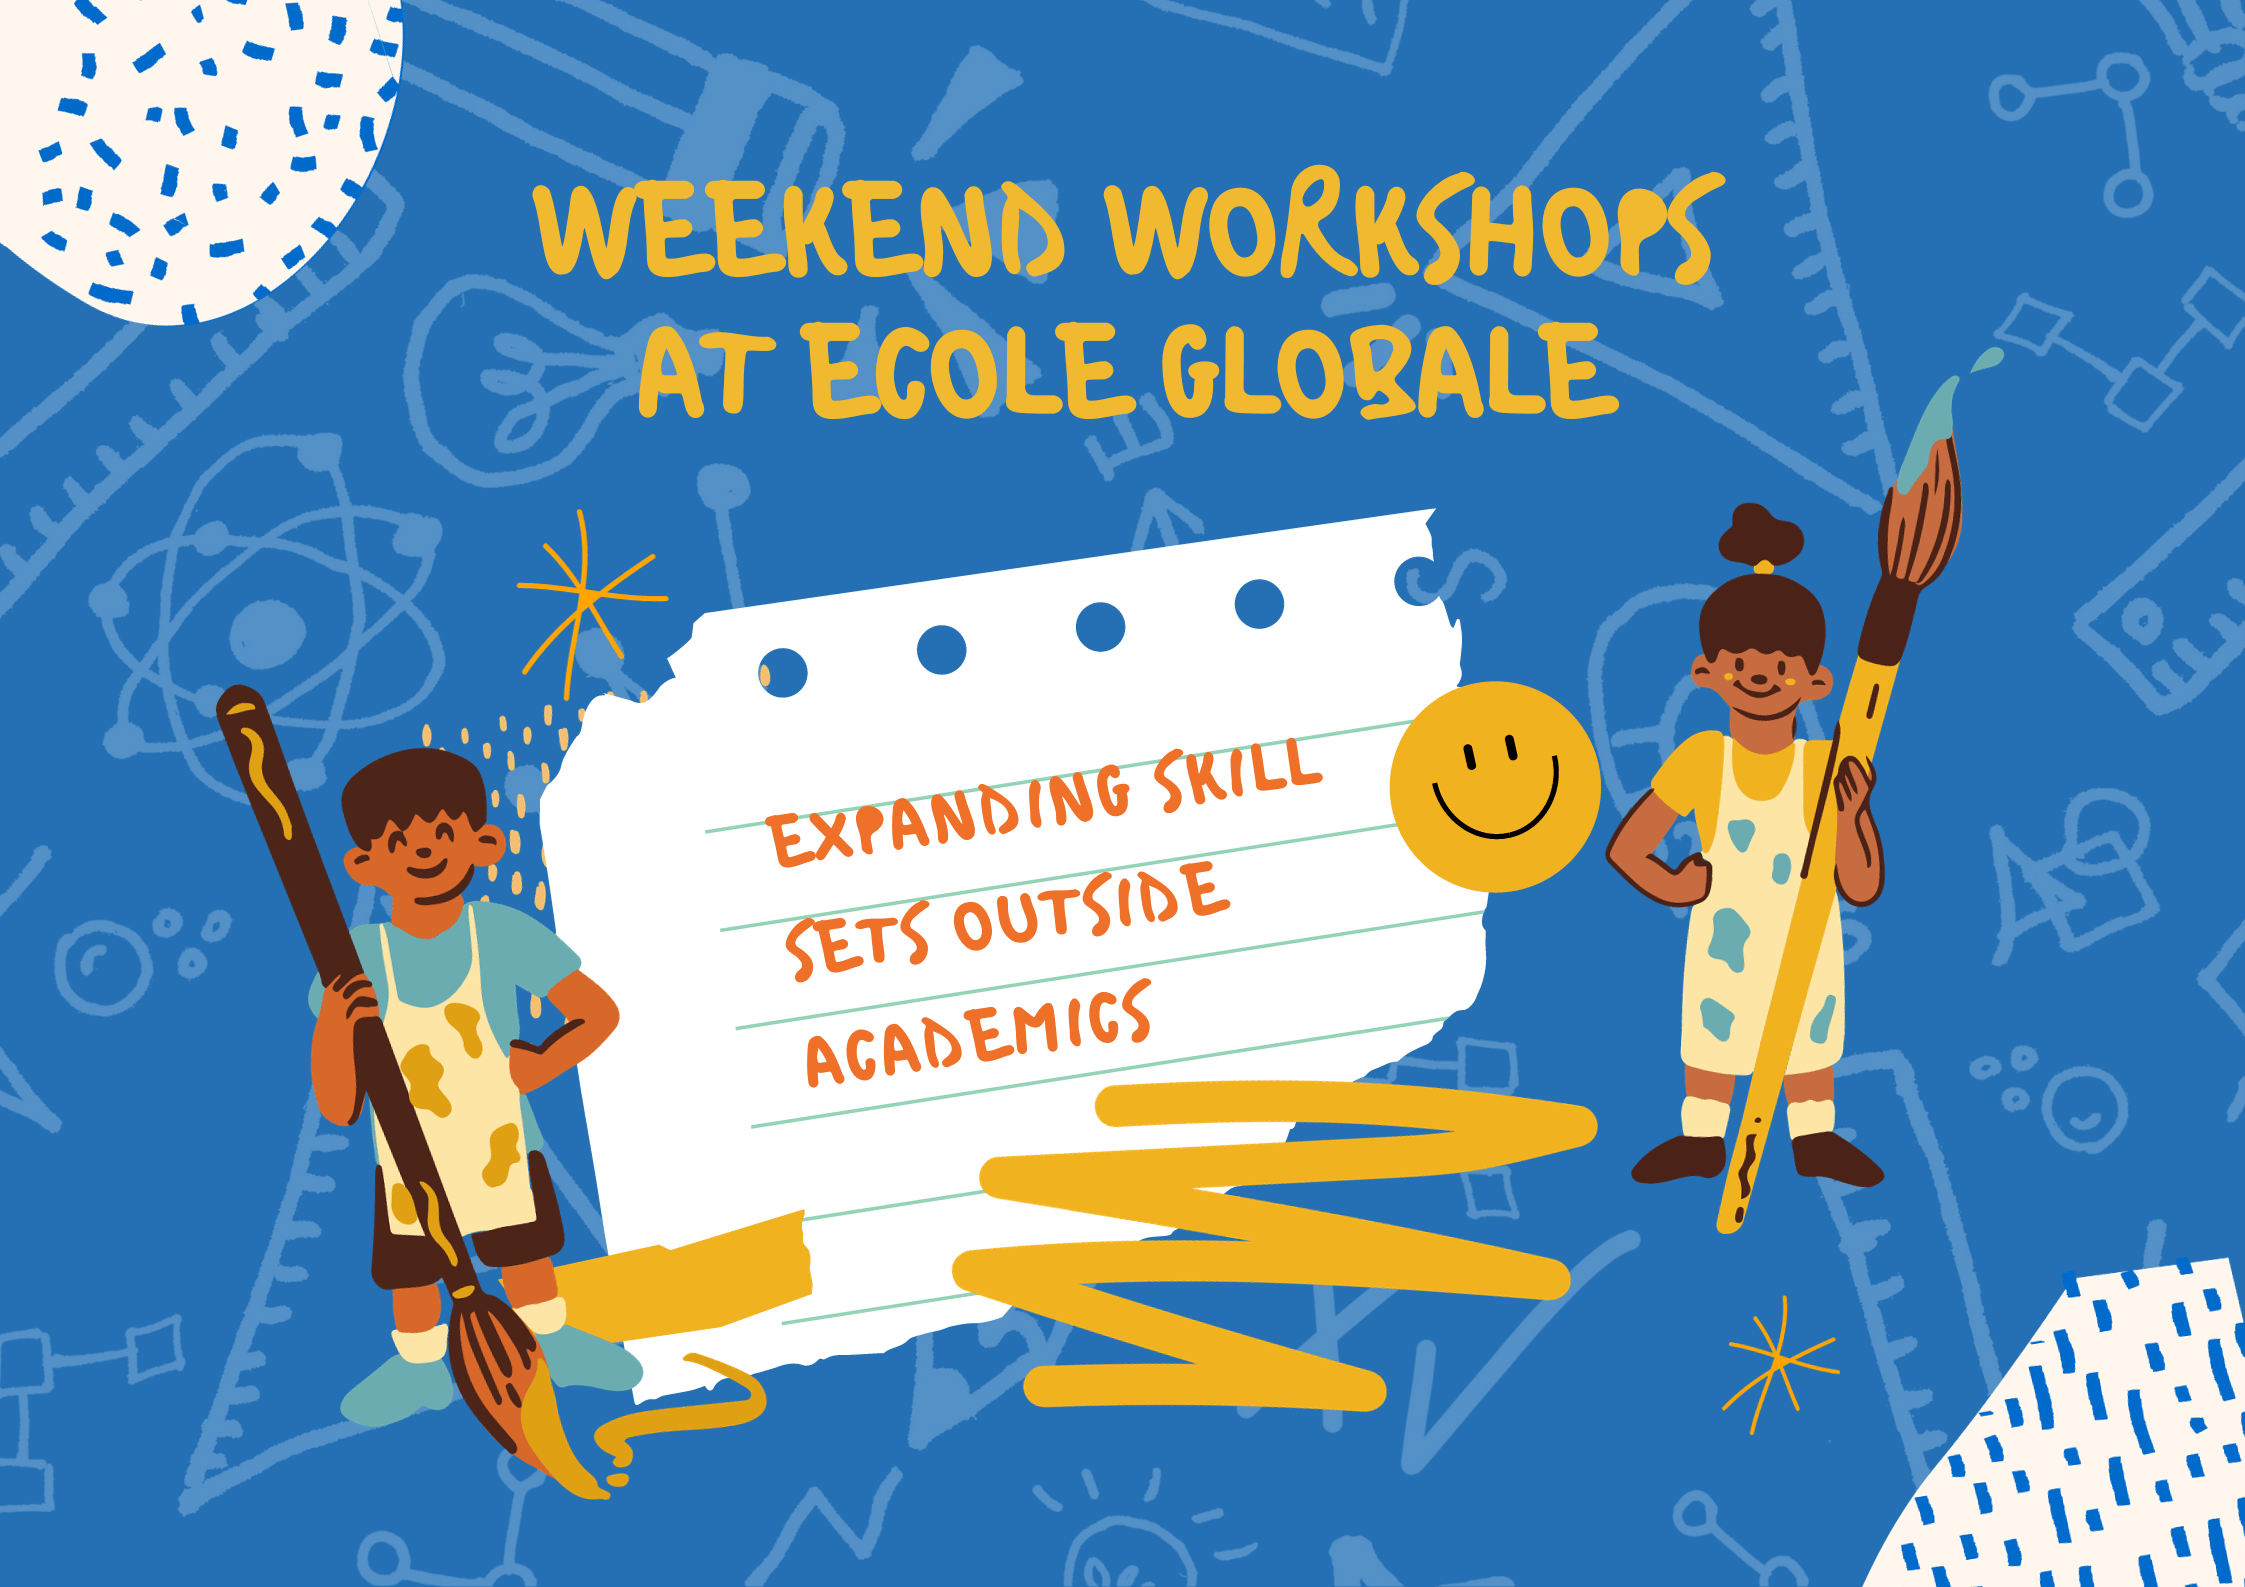 You are currently viewing Weekend Workshops: Expanding Skill Sets Outside Academics